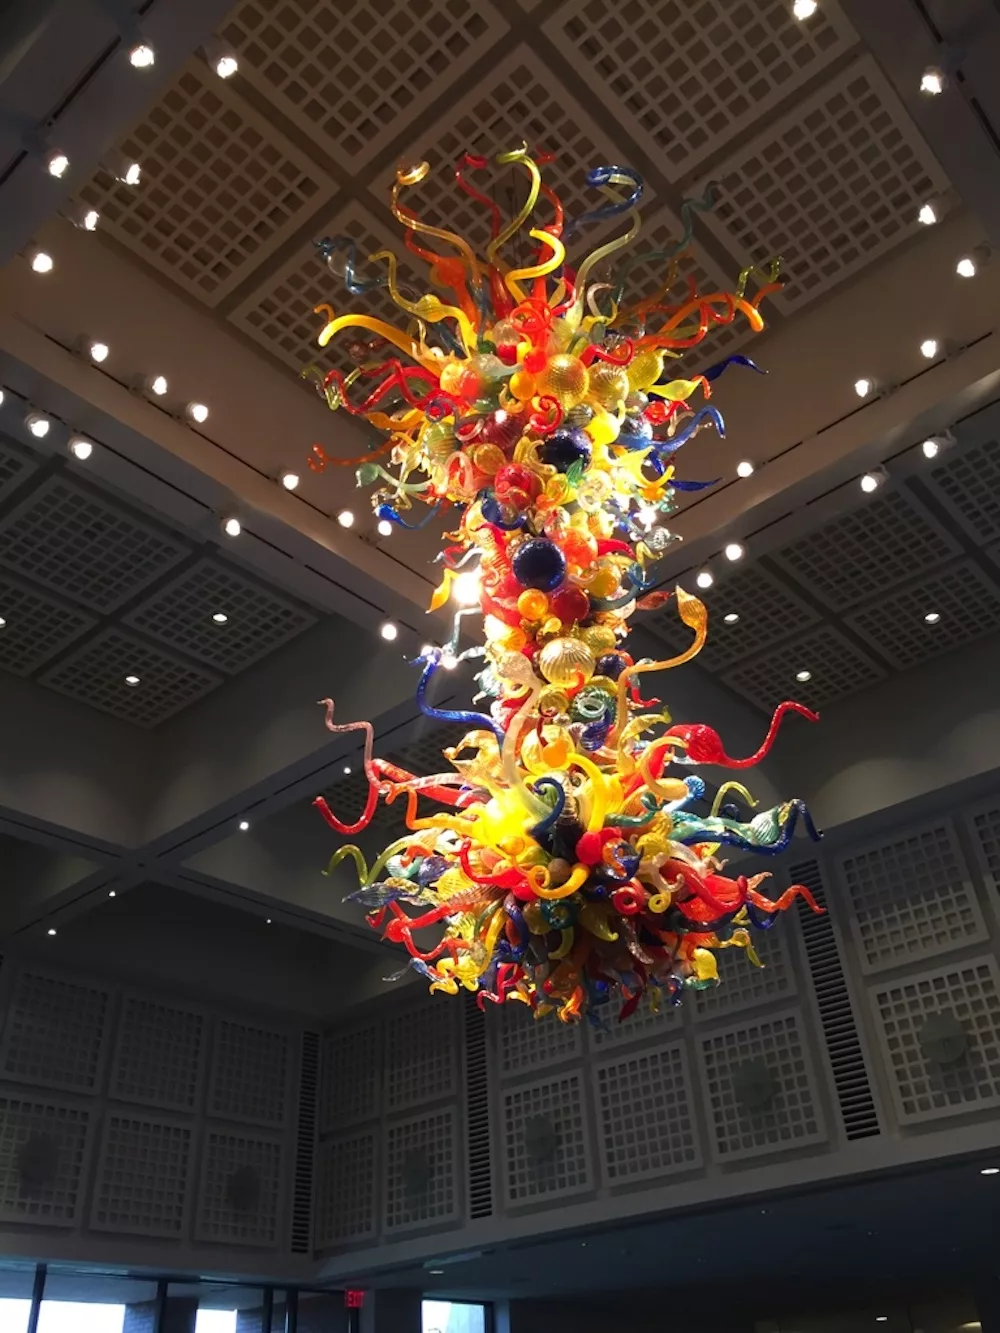 Colorful glass chandelier made by artist Dale Chihuly at the Wichita Art Museum in Wichita, Kansas